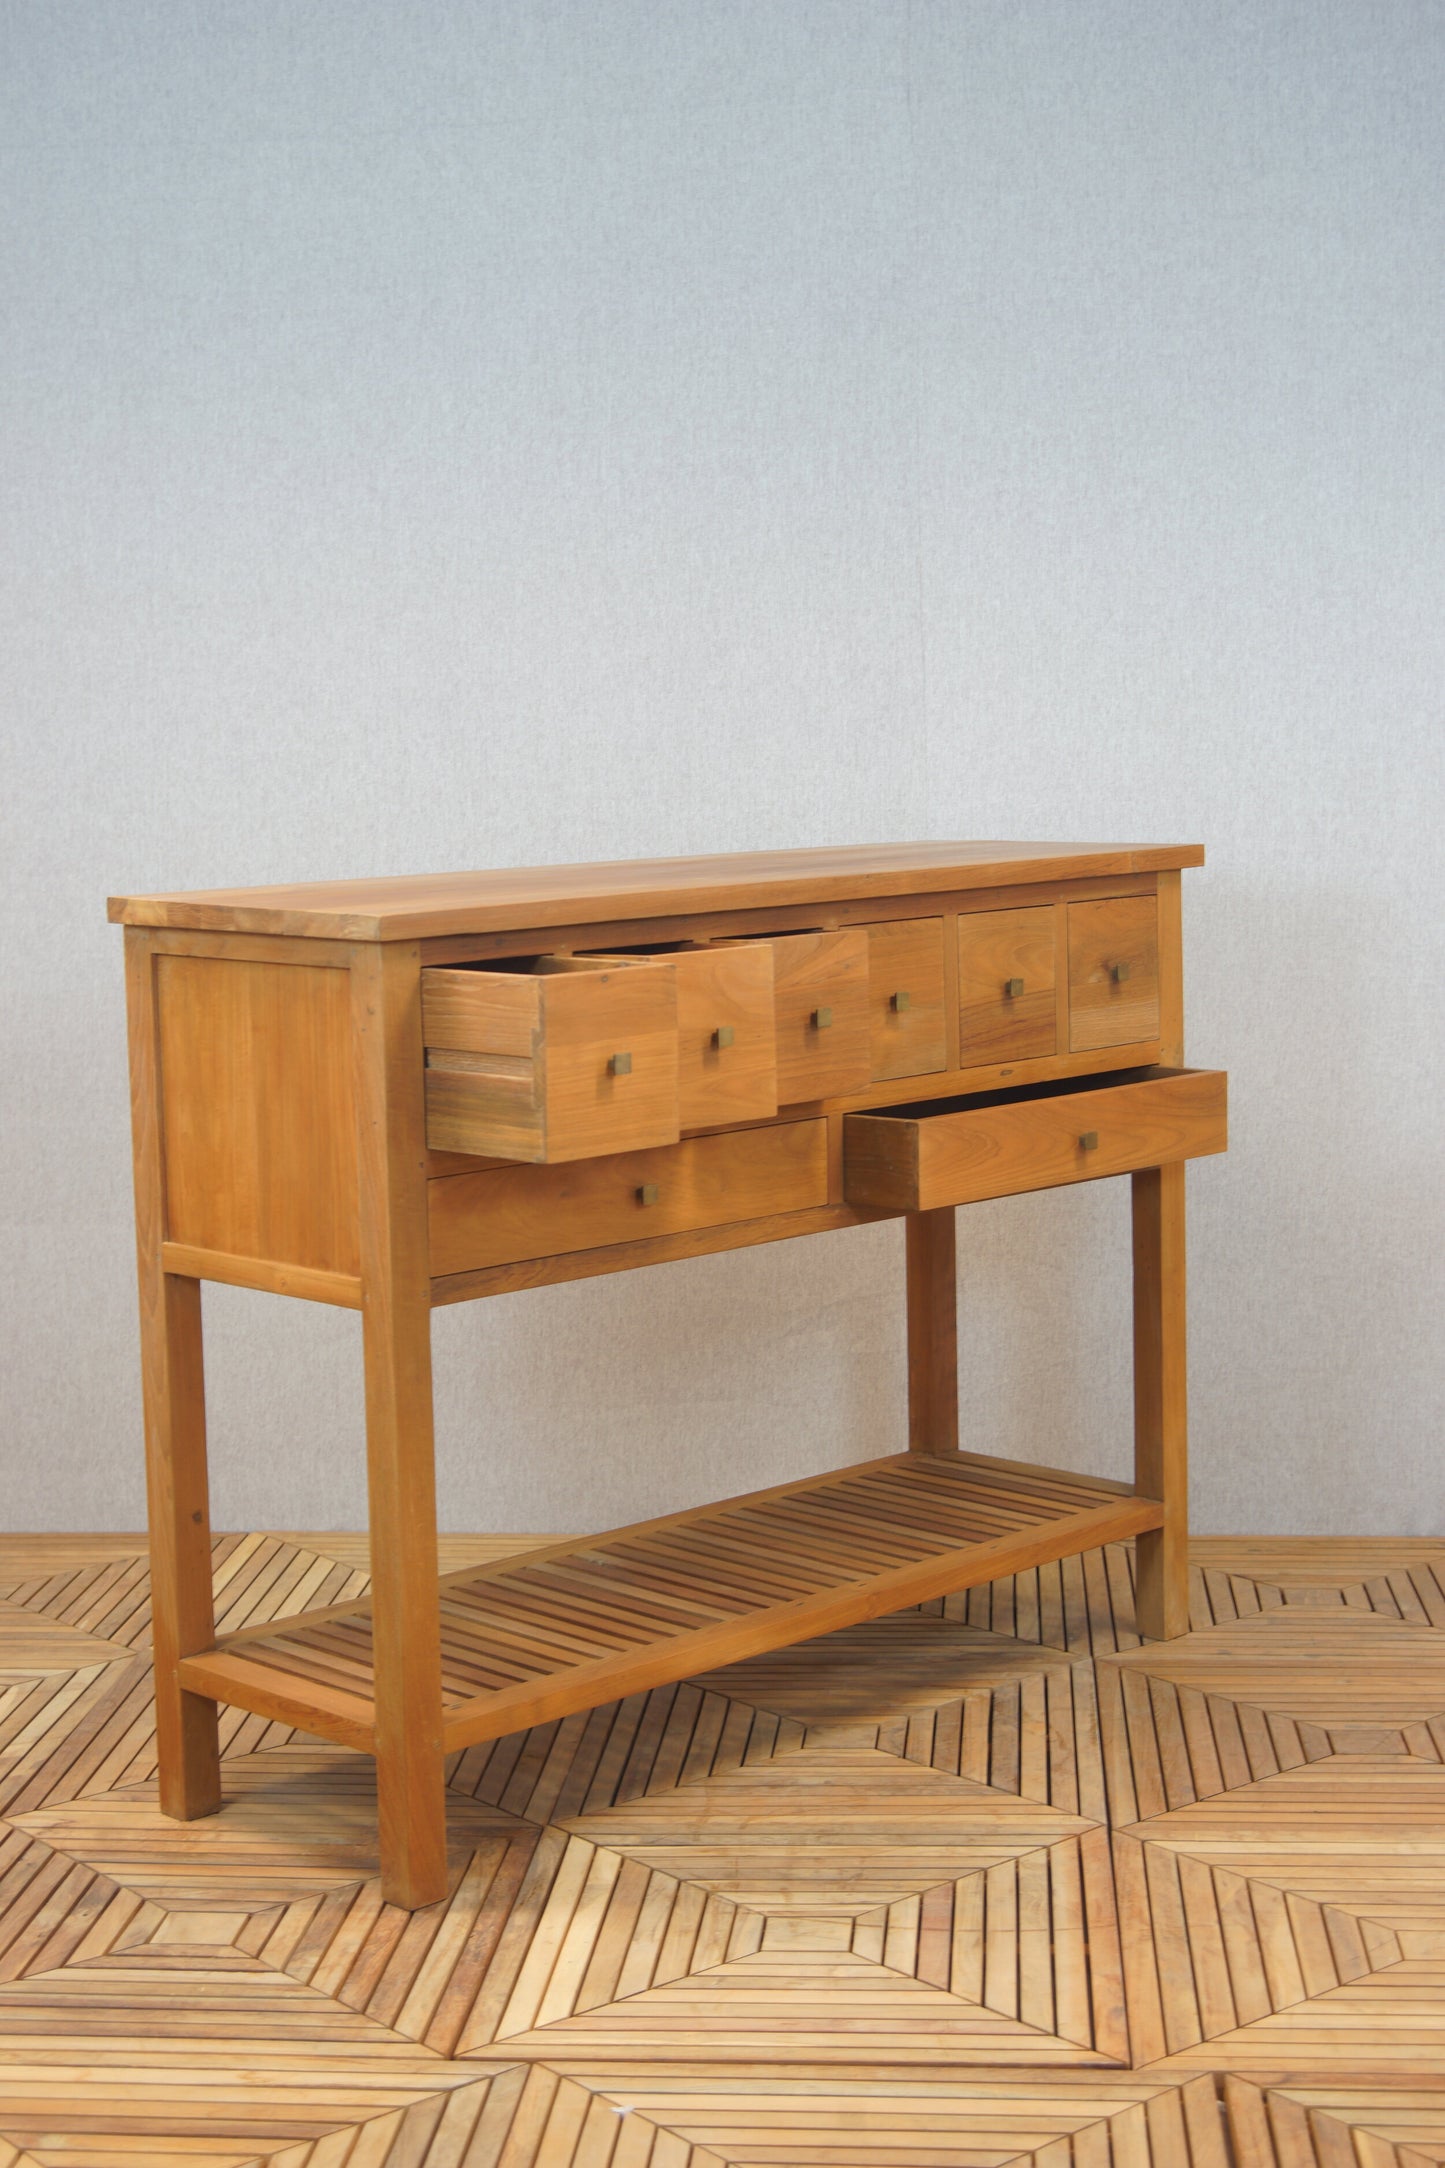 Contemporary Console Table 8 Drawers